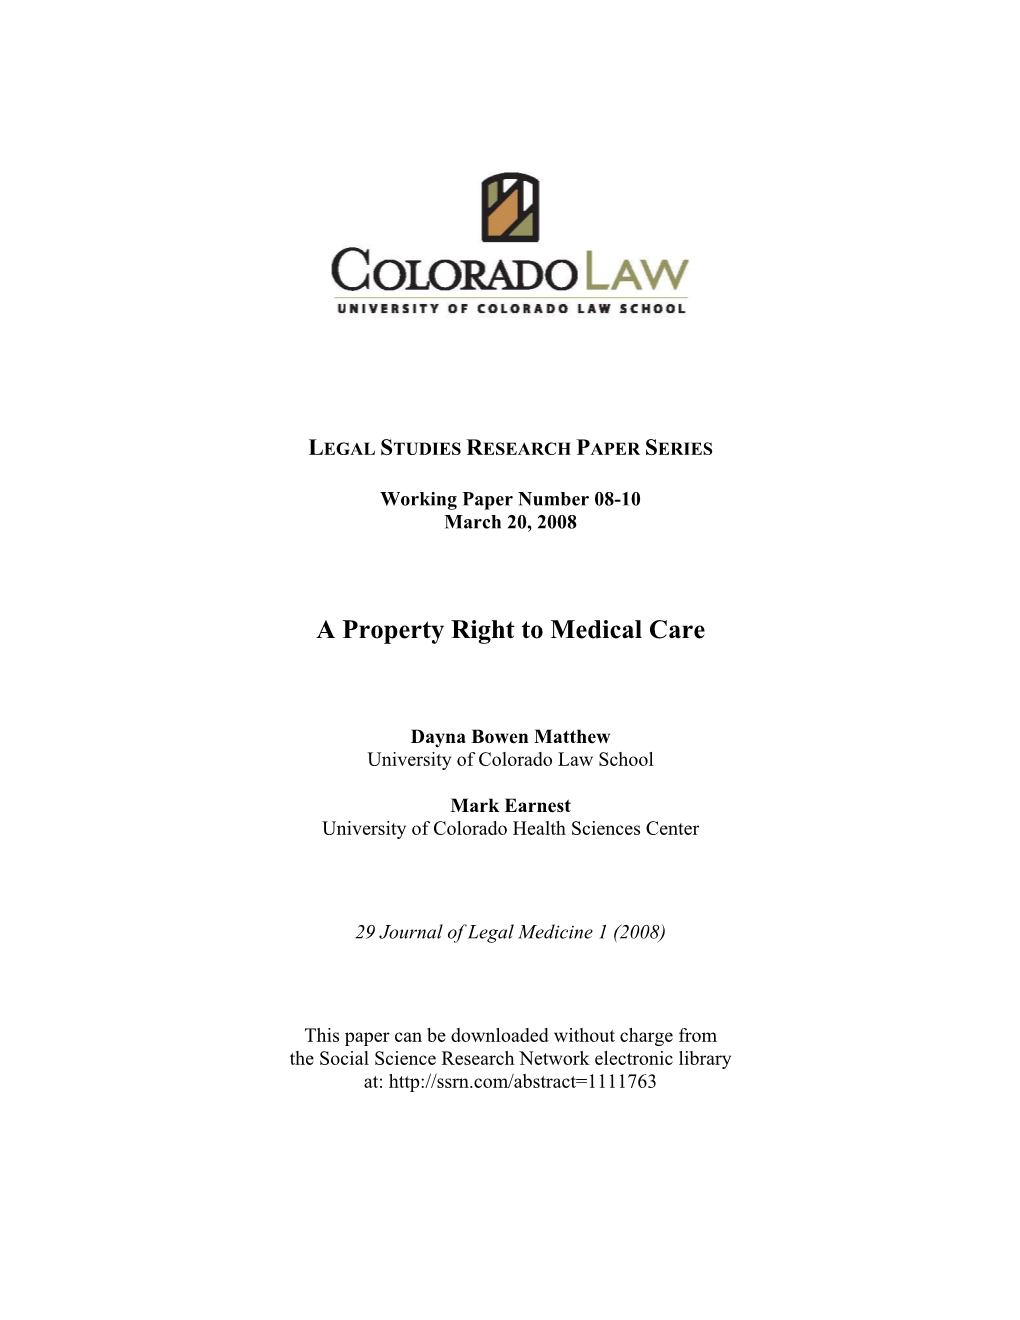 A Property Right to Medical Care